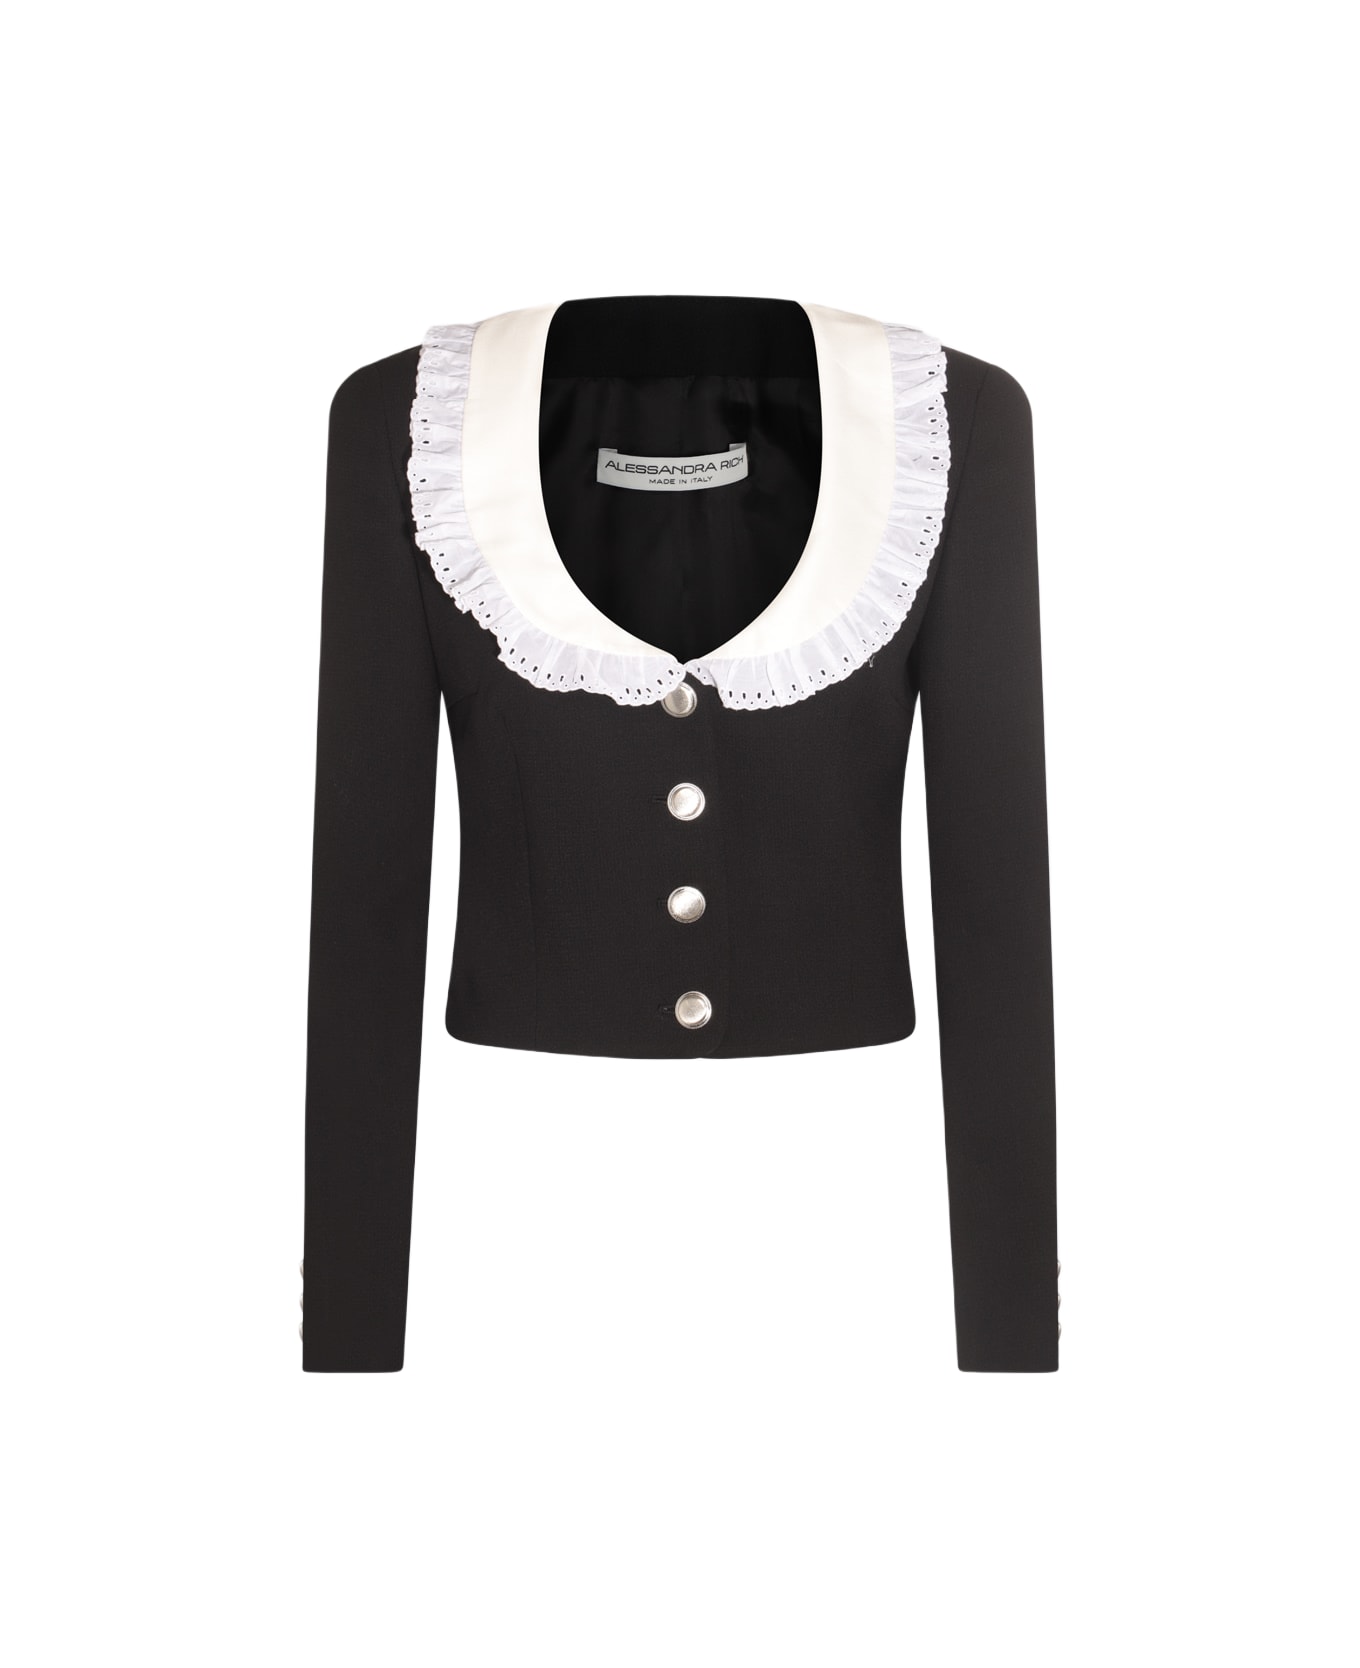 Alessandra Rich Black And White Silk-wool Blend Casual Jacket - Black